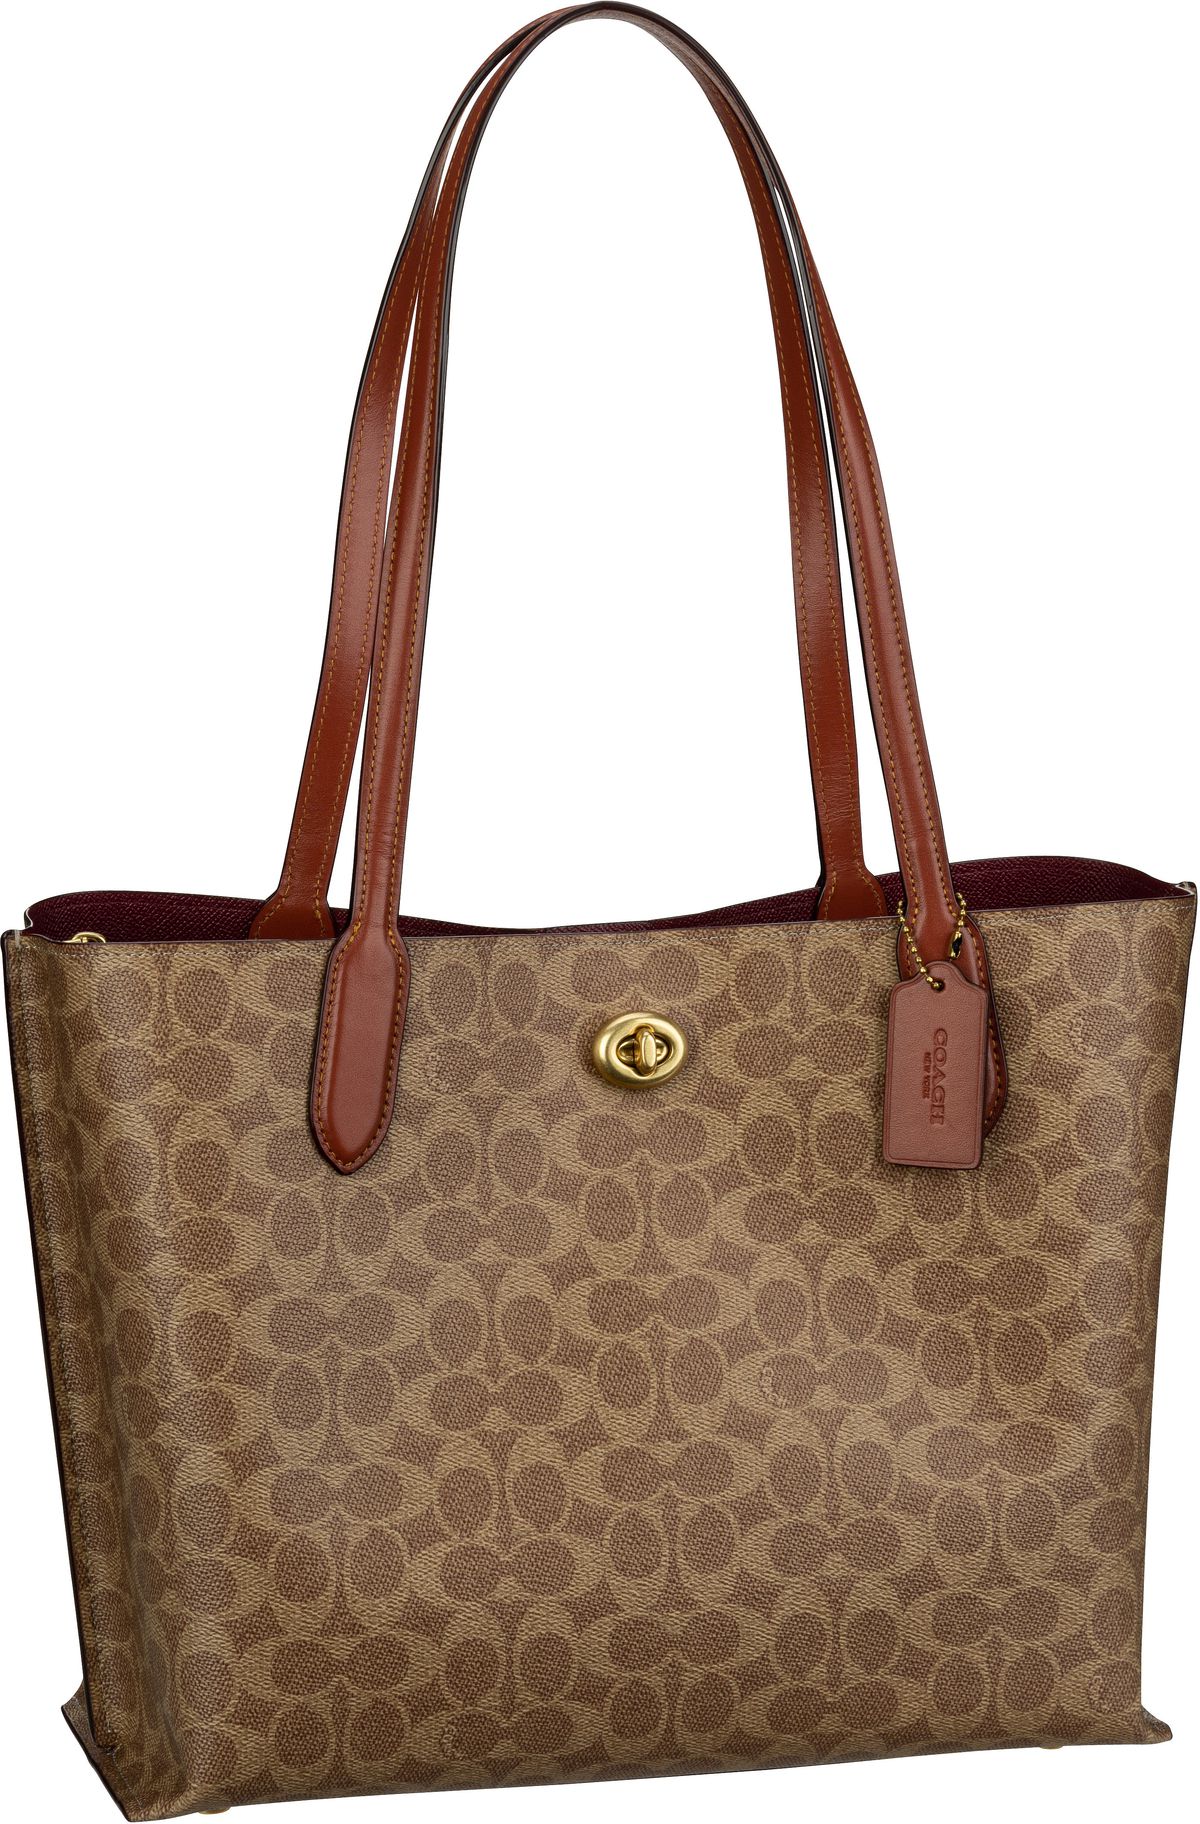 COACH Willow Tote Coated Canvas Signature - Tan Rust